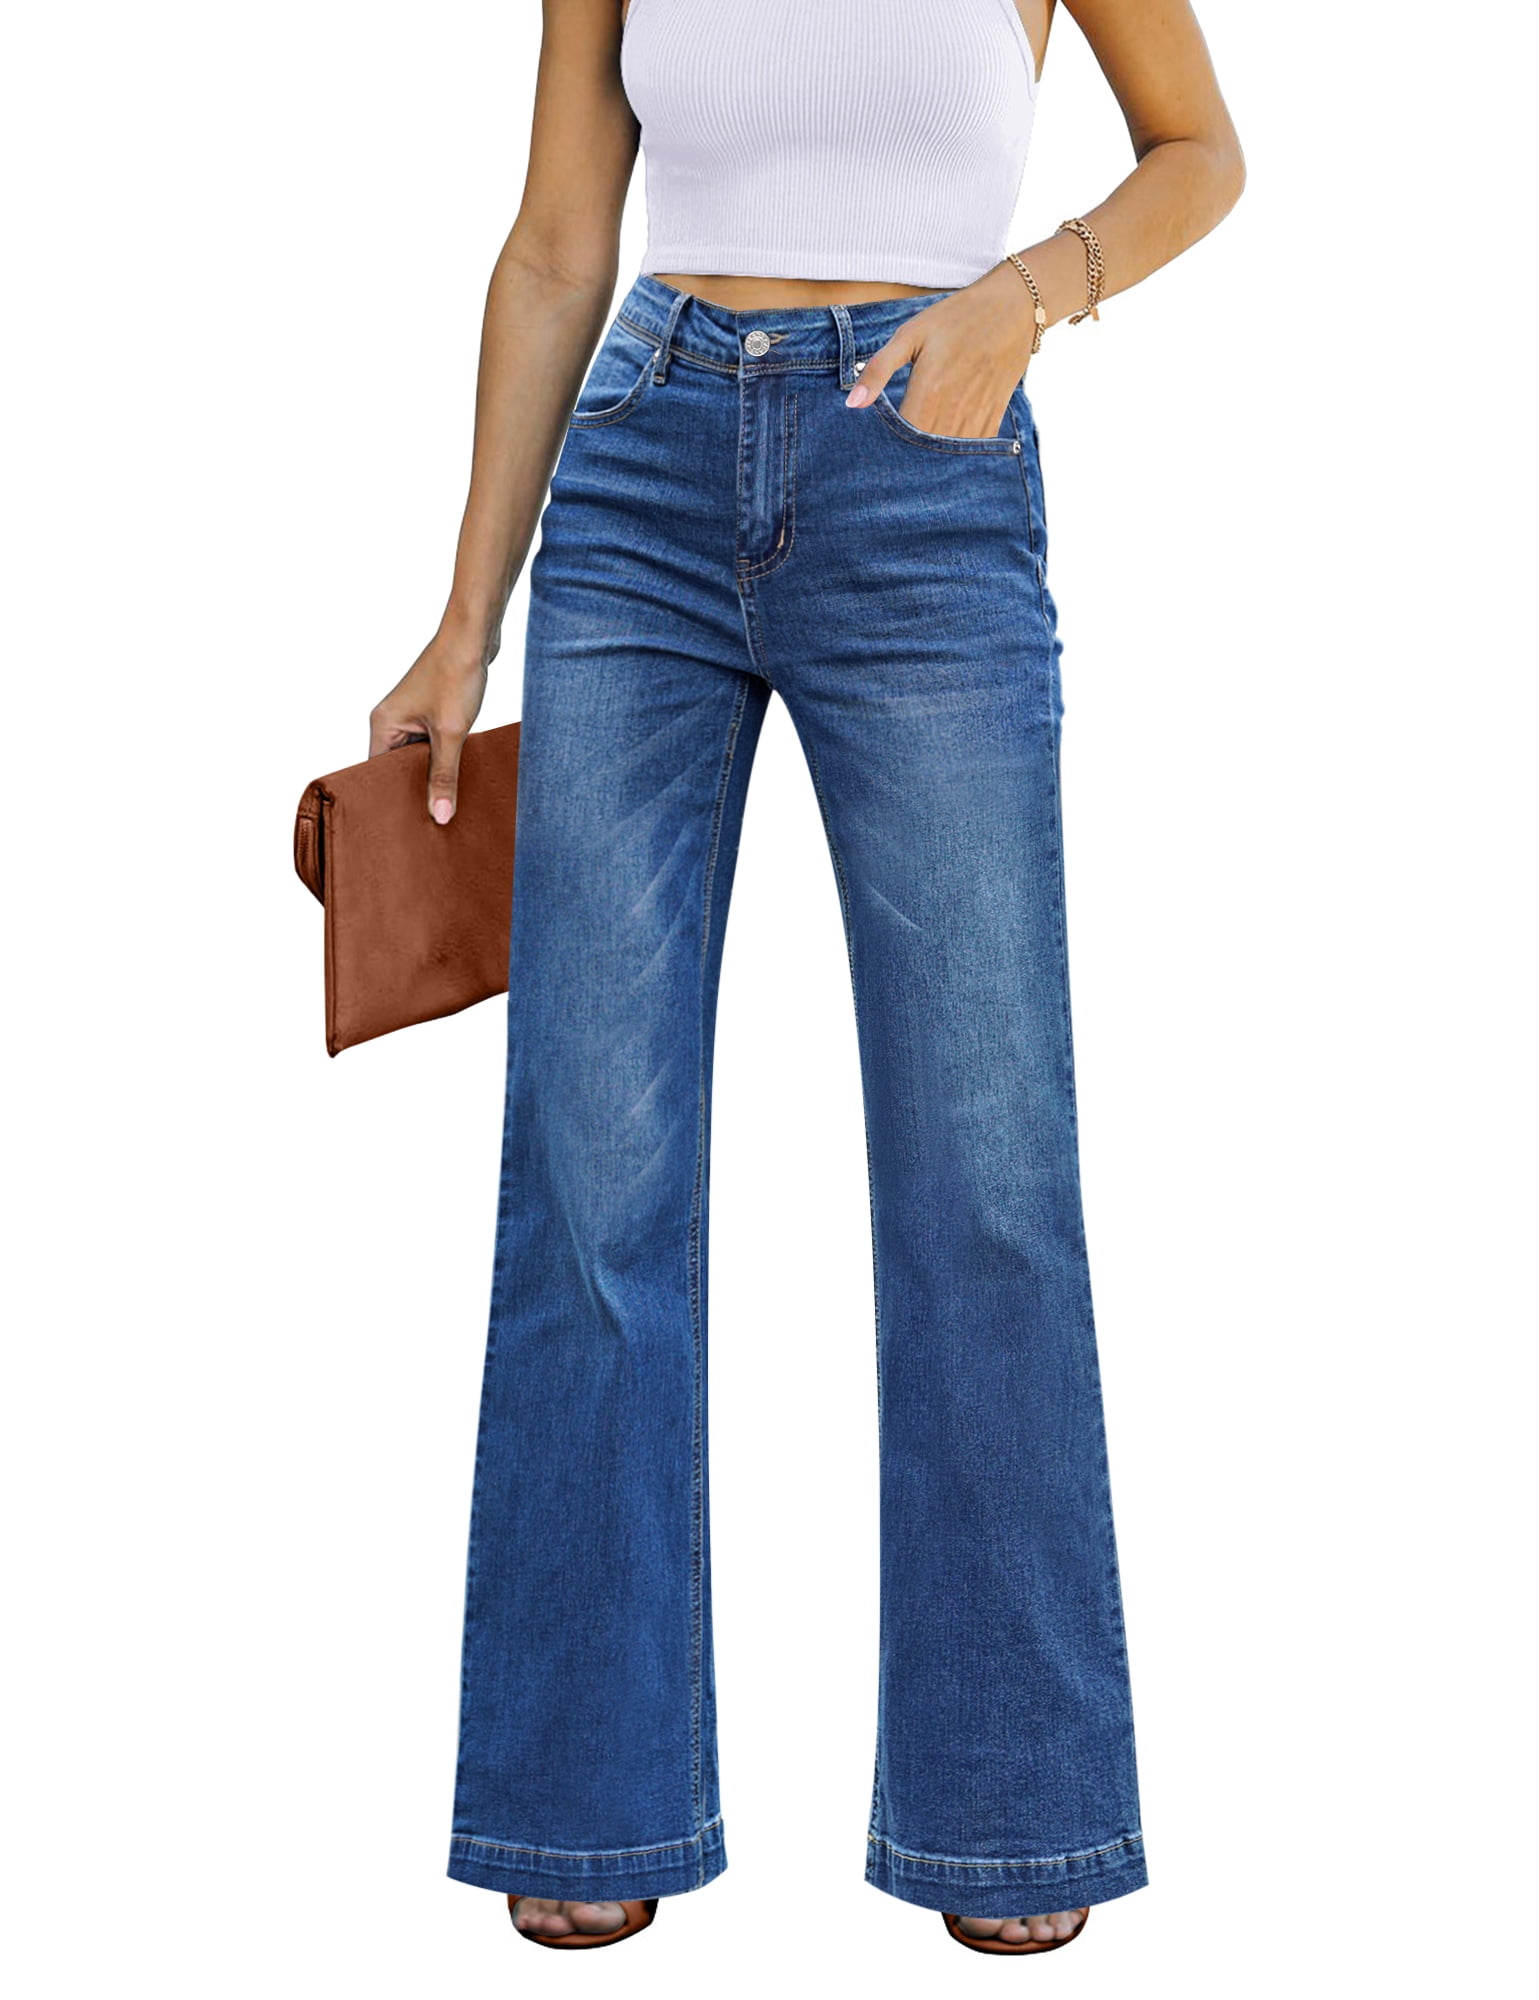 Vetinee Women's High Waisted Flare Jeans Casual Fitted Bell Bottom ...